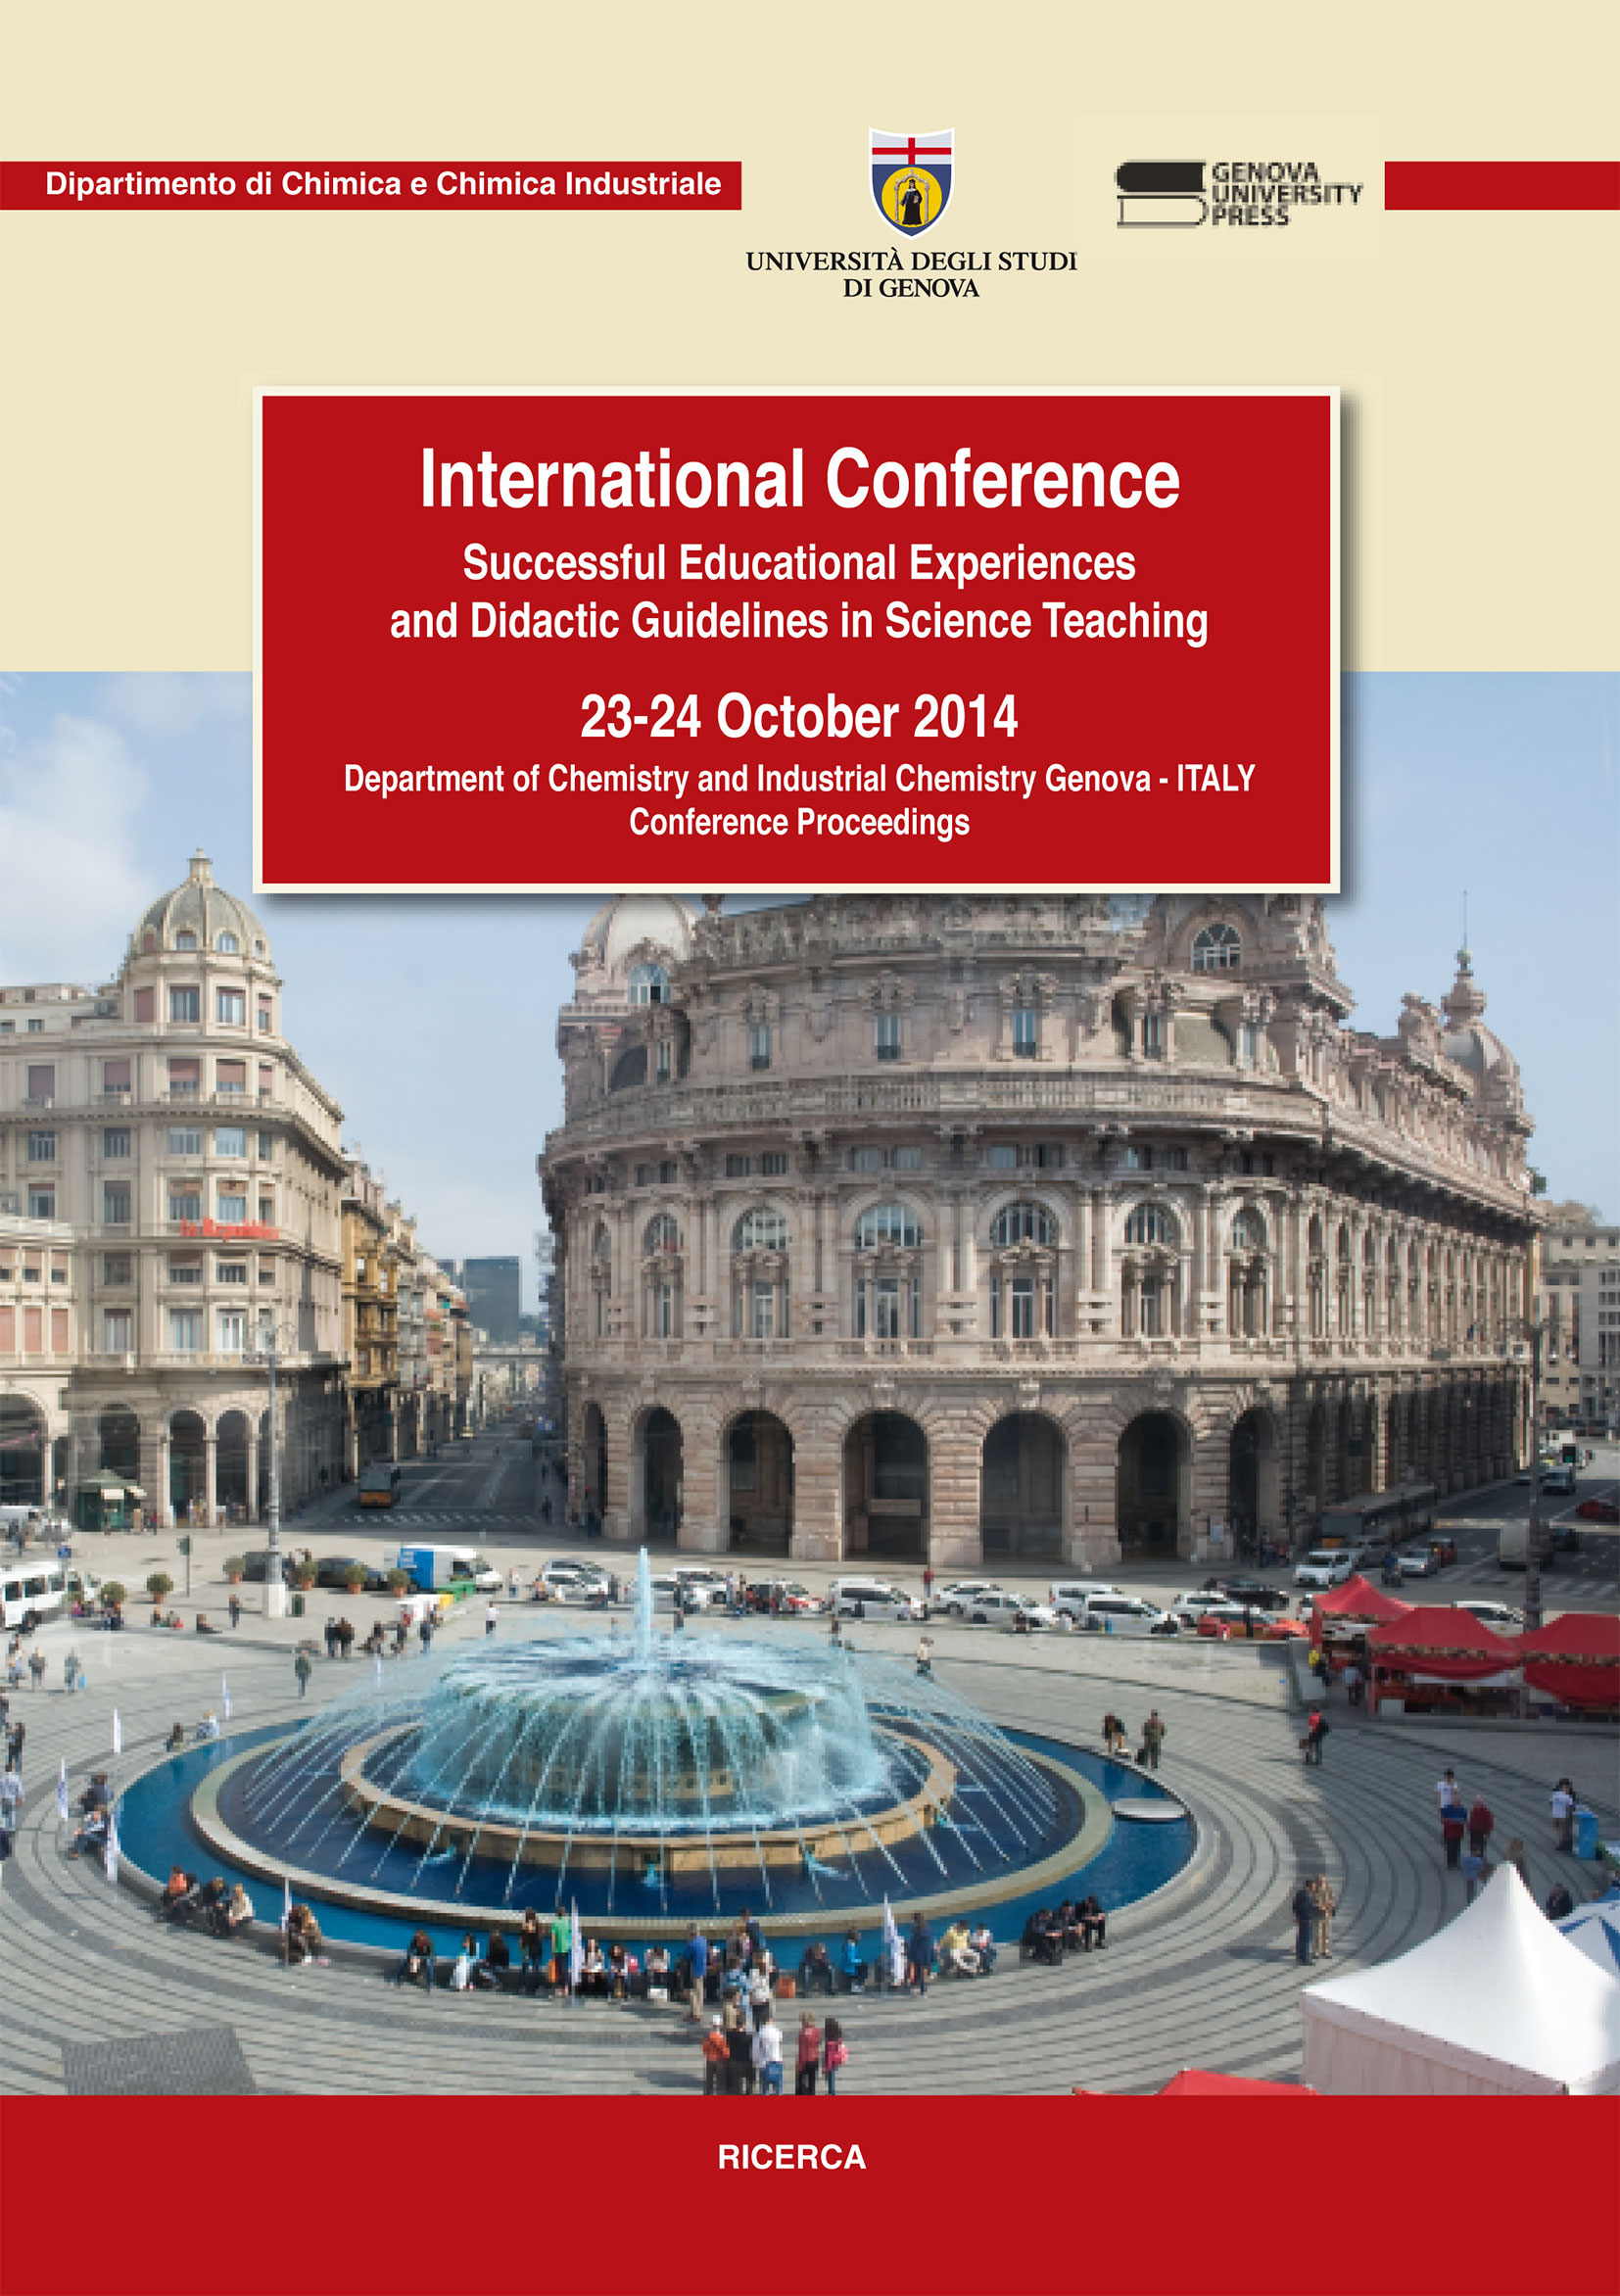 International Conference Successful Educational Experiences and Didactic Guidelines in Science Teaching